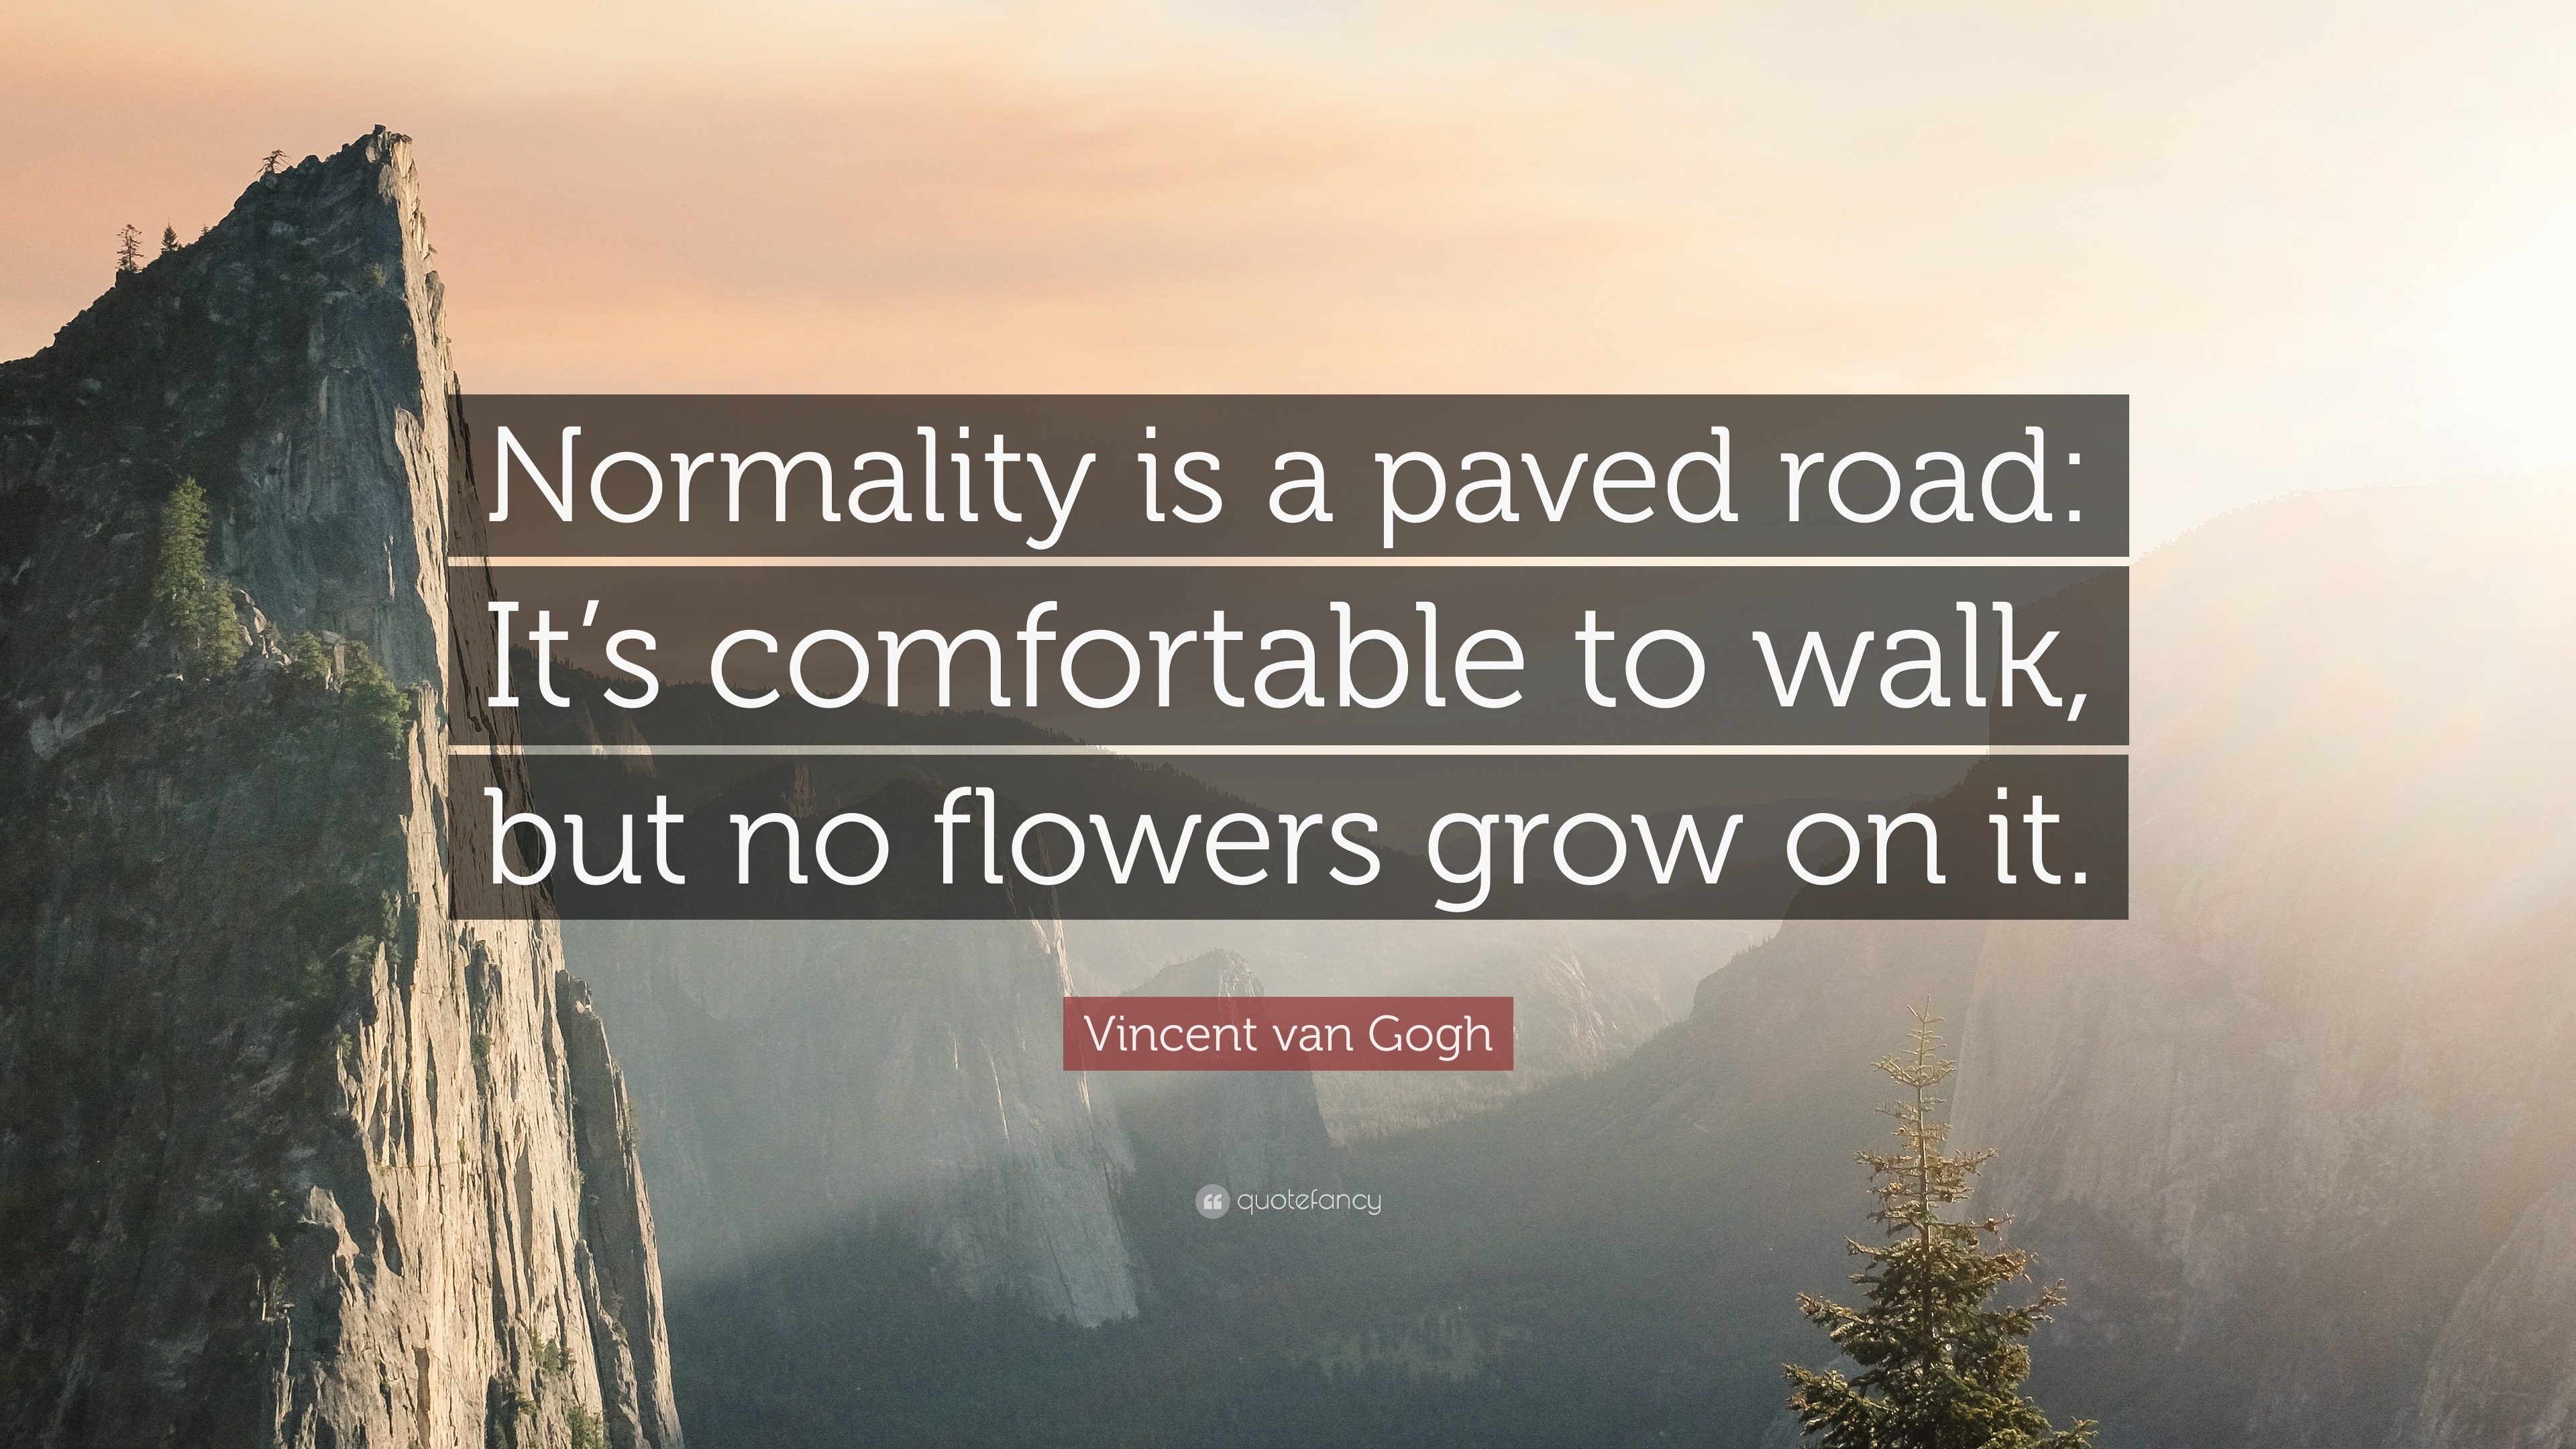 Vincent van Gogh Quote “Normality is a paved road It’s